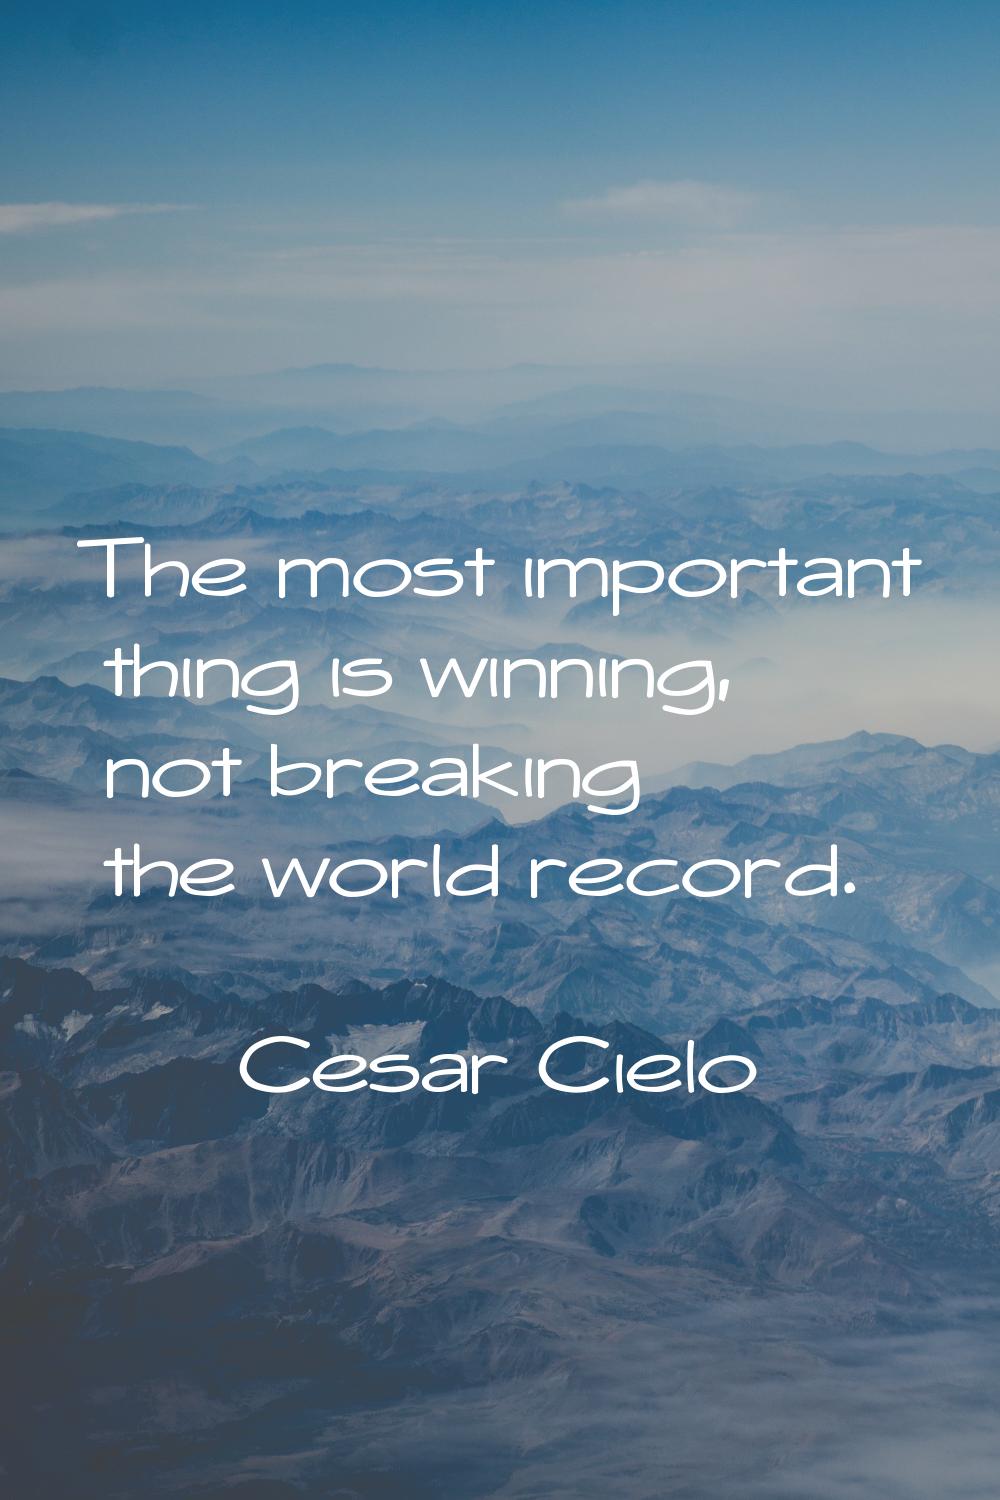 The most important thing is winning, not breaking the world record.